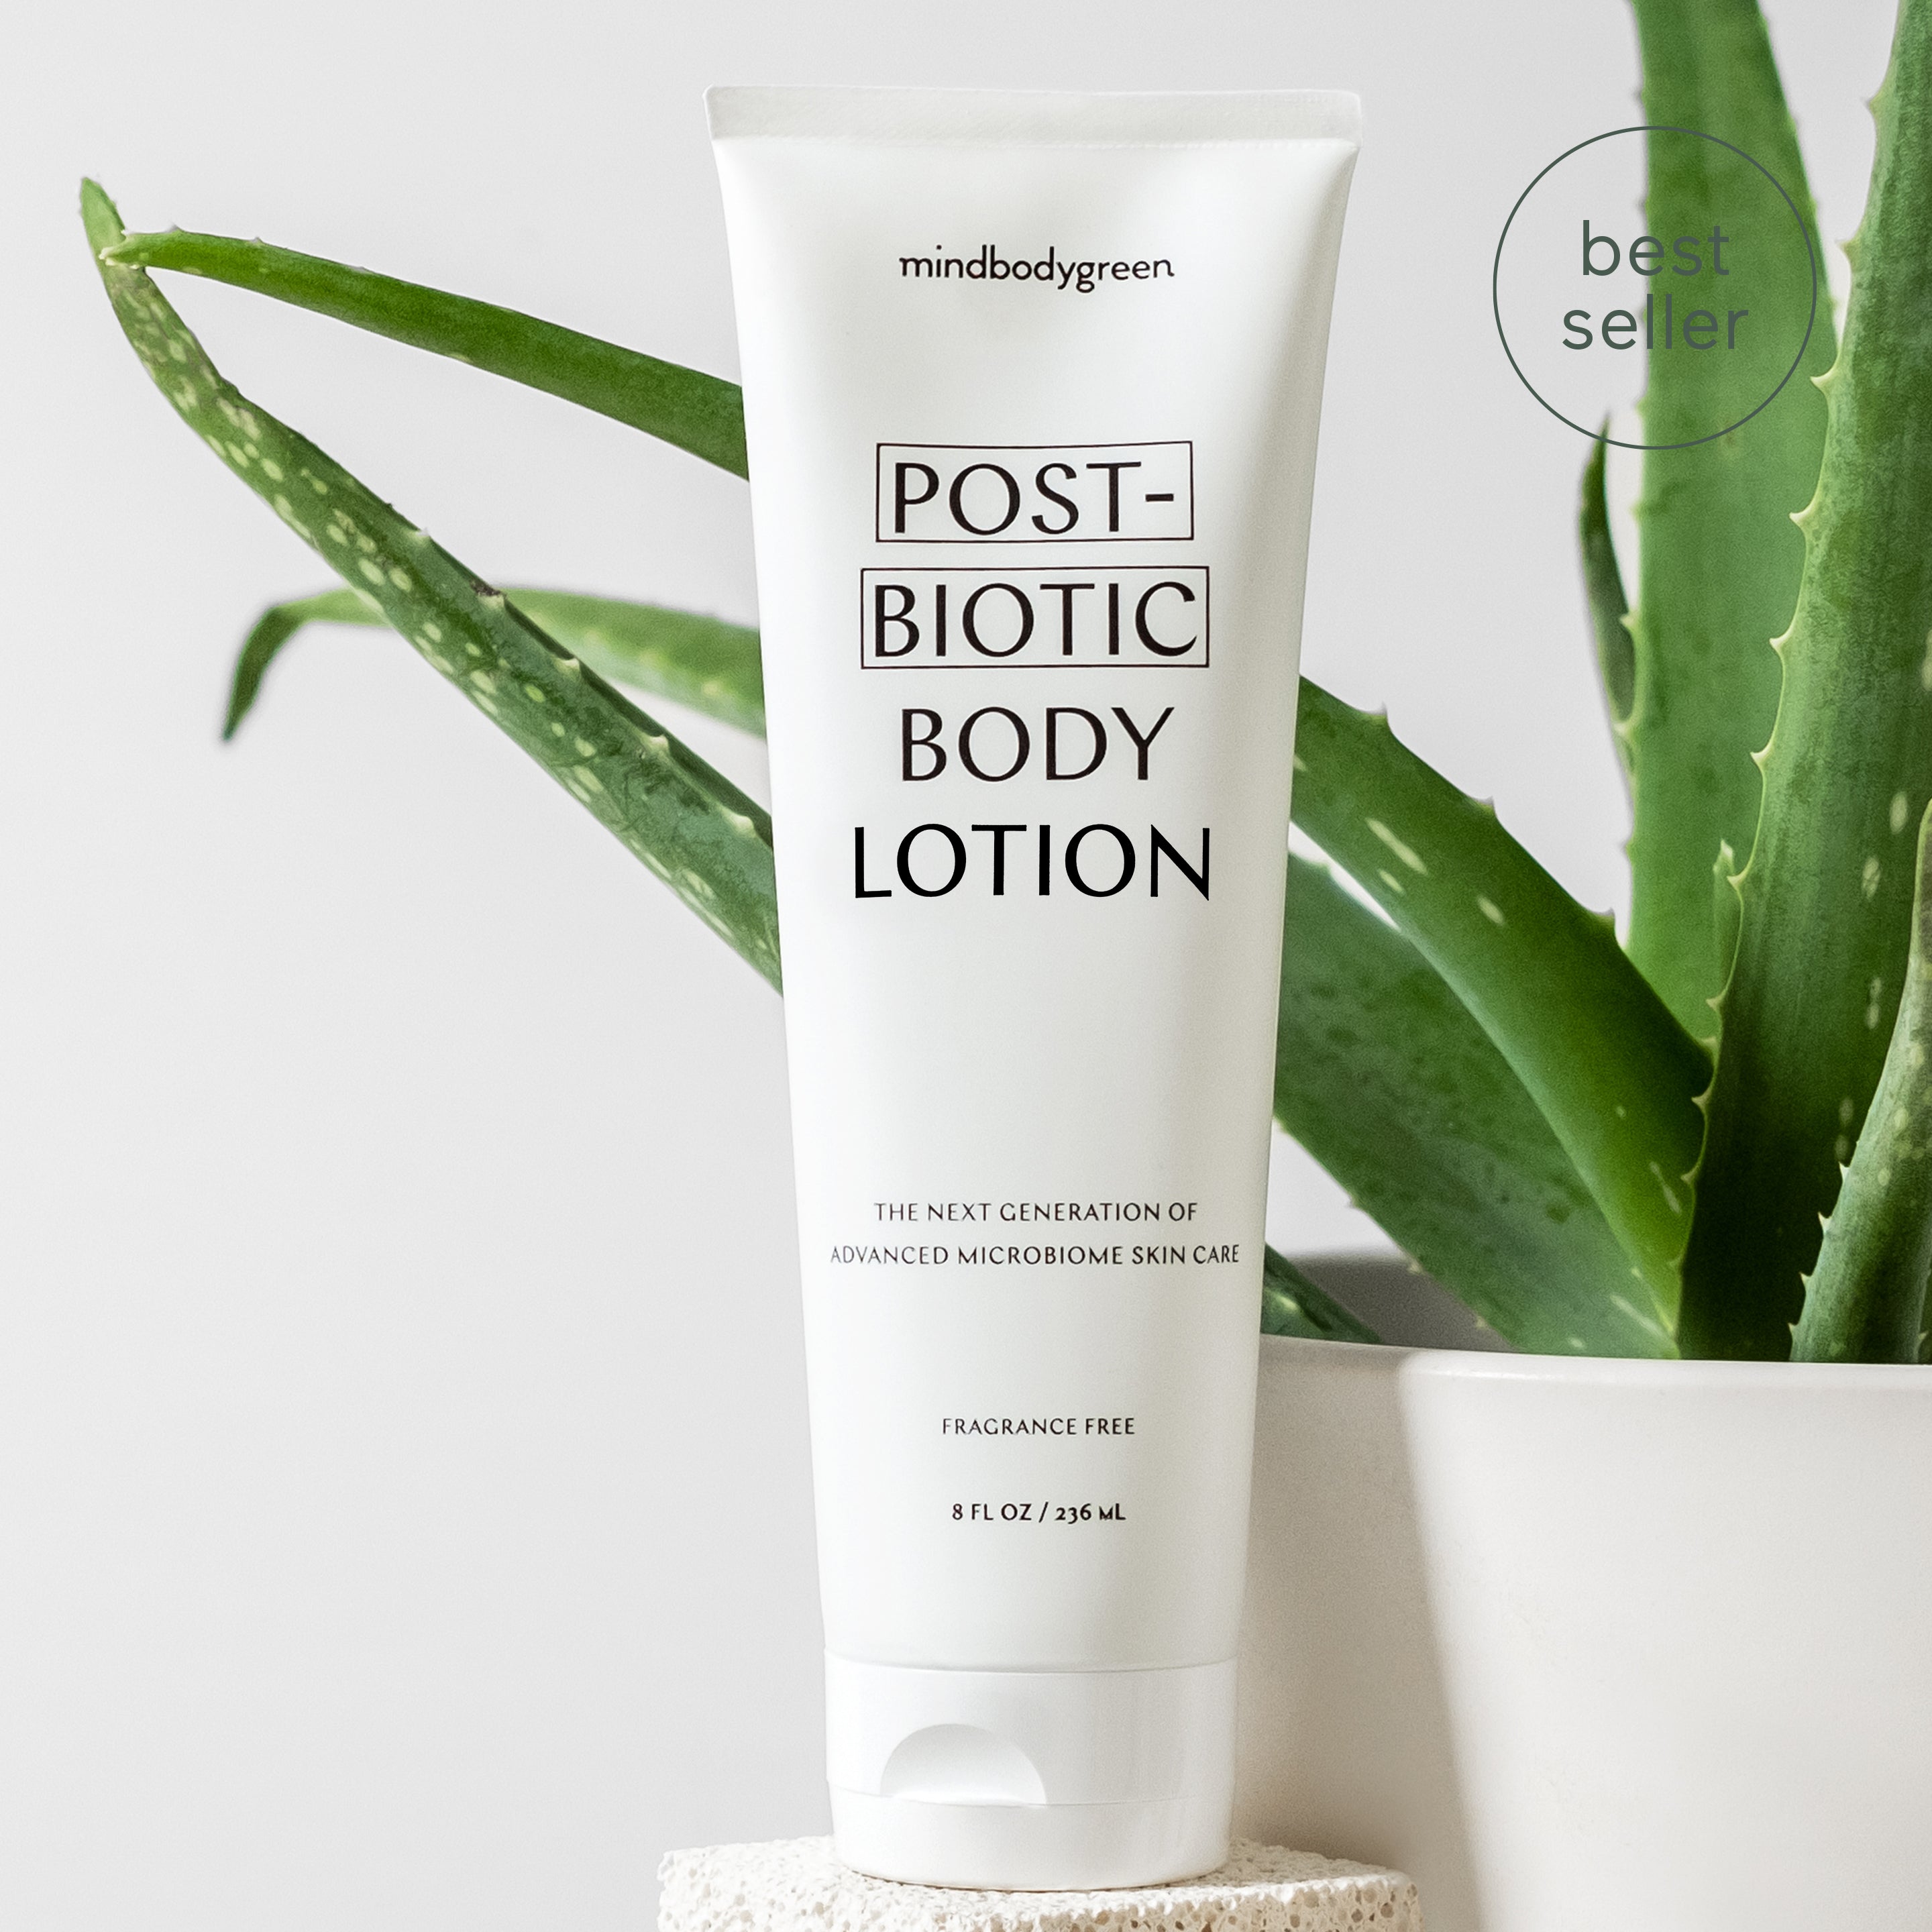 18 Best Non-Toxic Body Lotion Brands Without Harmful Chemicals